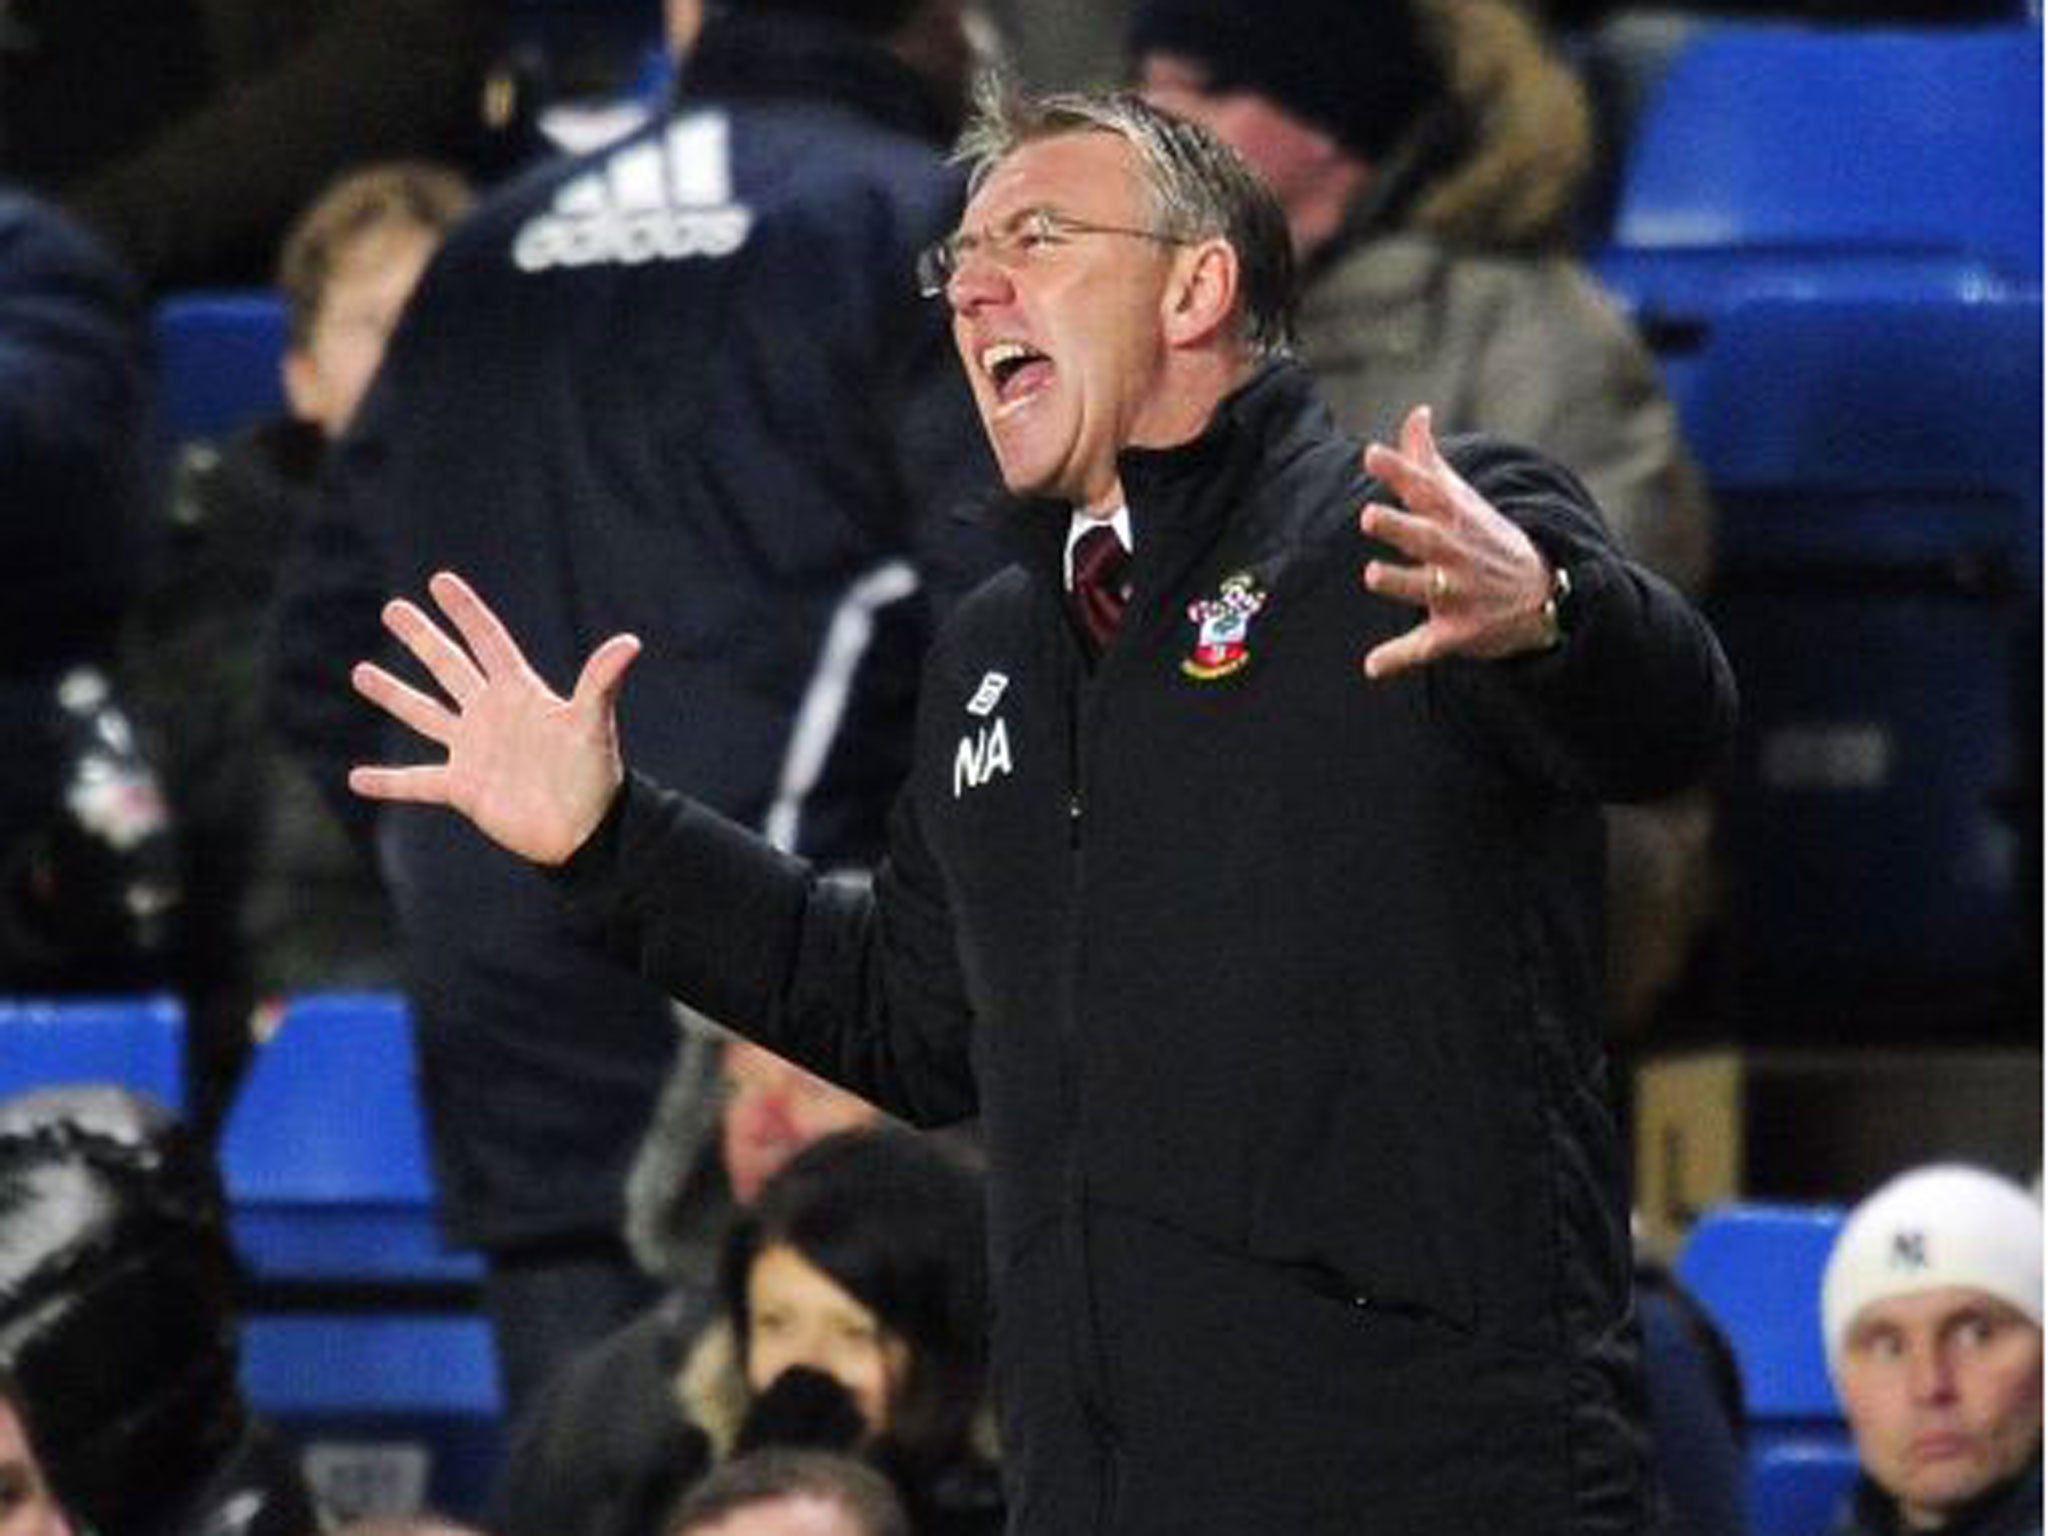 Nigel Adkins was widely tipped for the sack – and got it